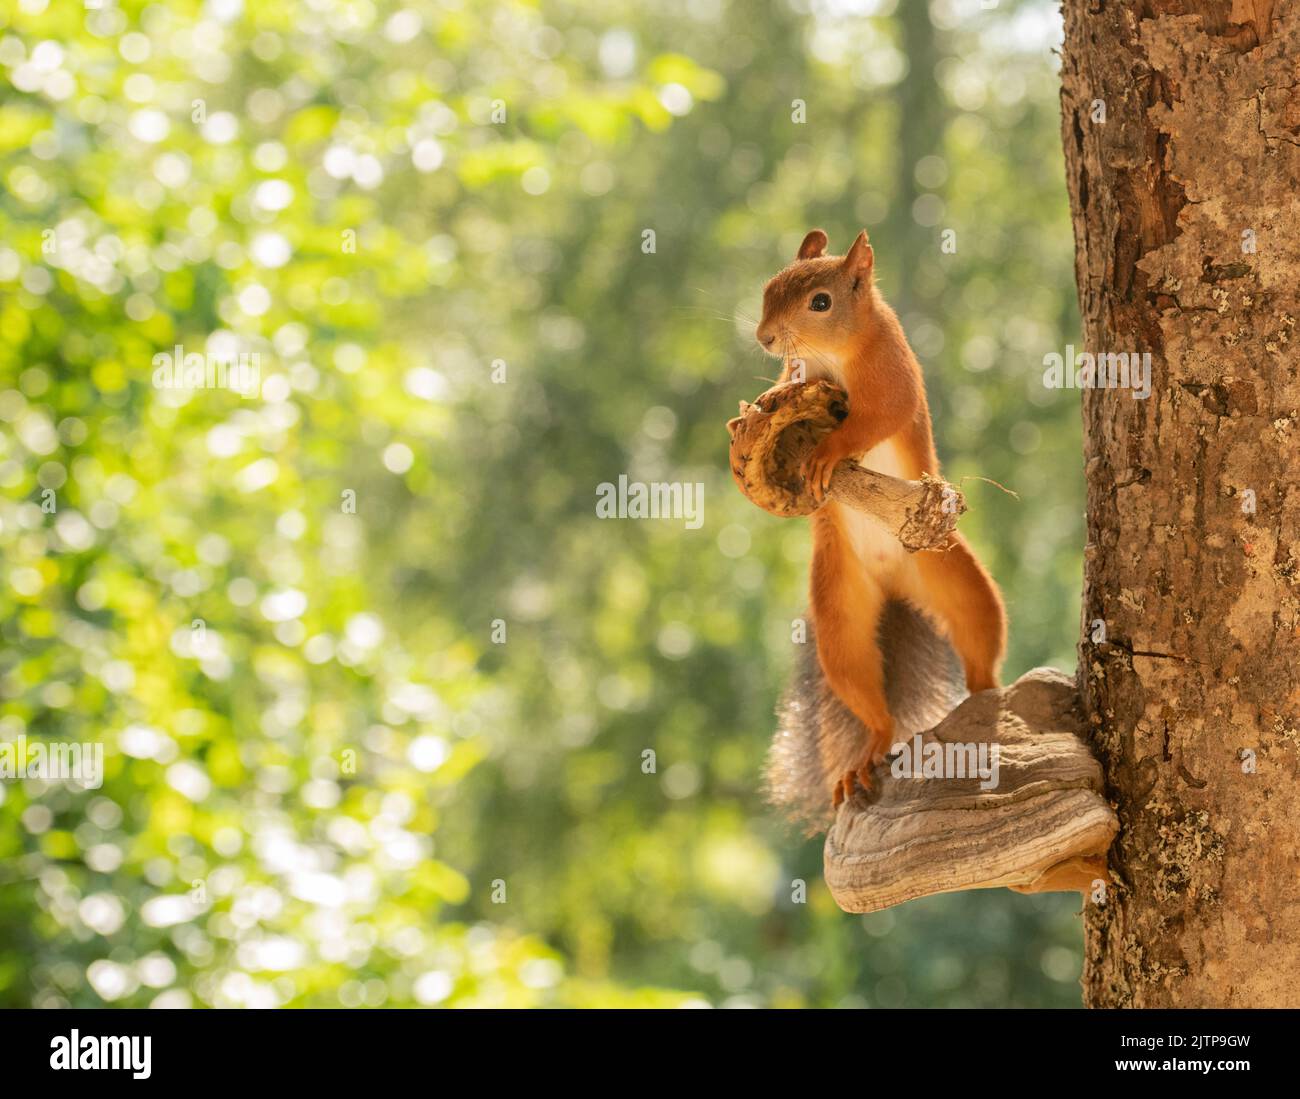 Red Squirrels with mushrooms and tree Stock Photo